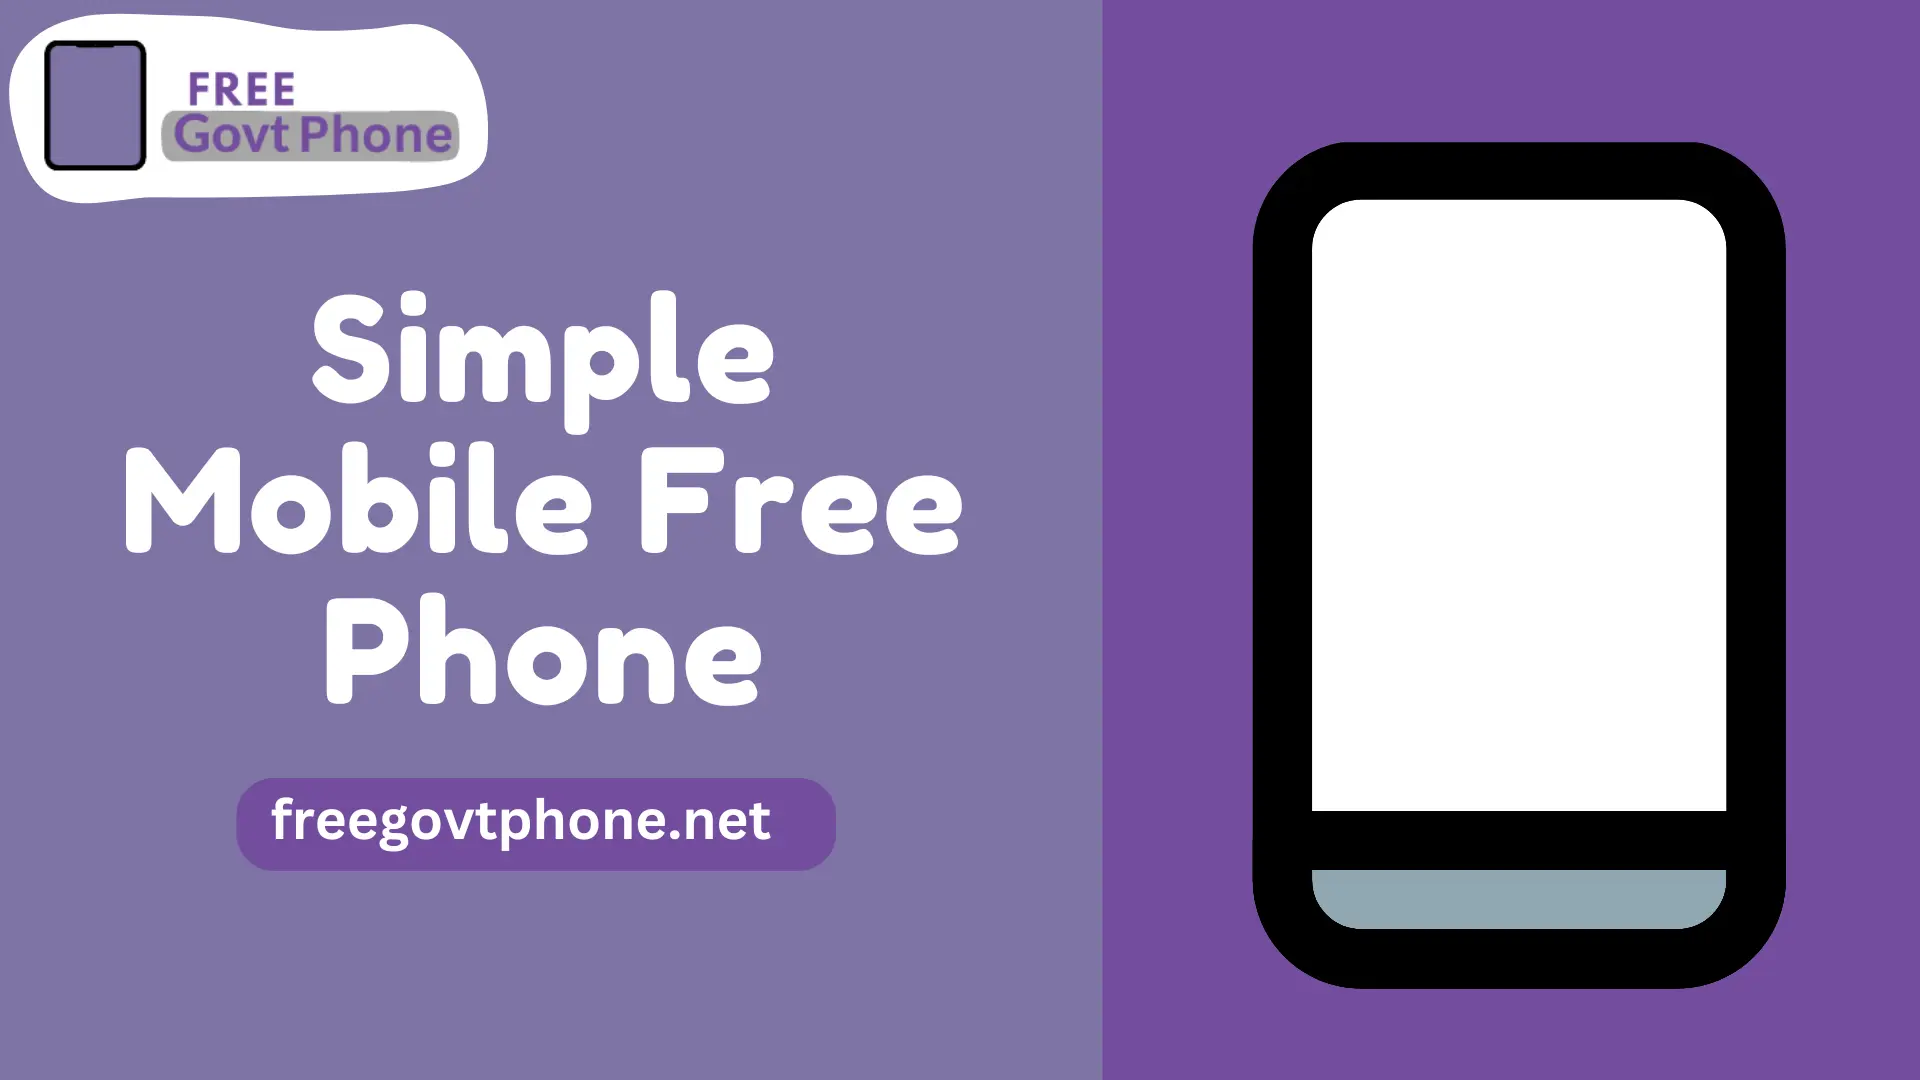 Simple Mobile Free Phone